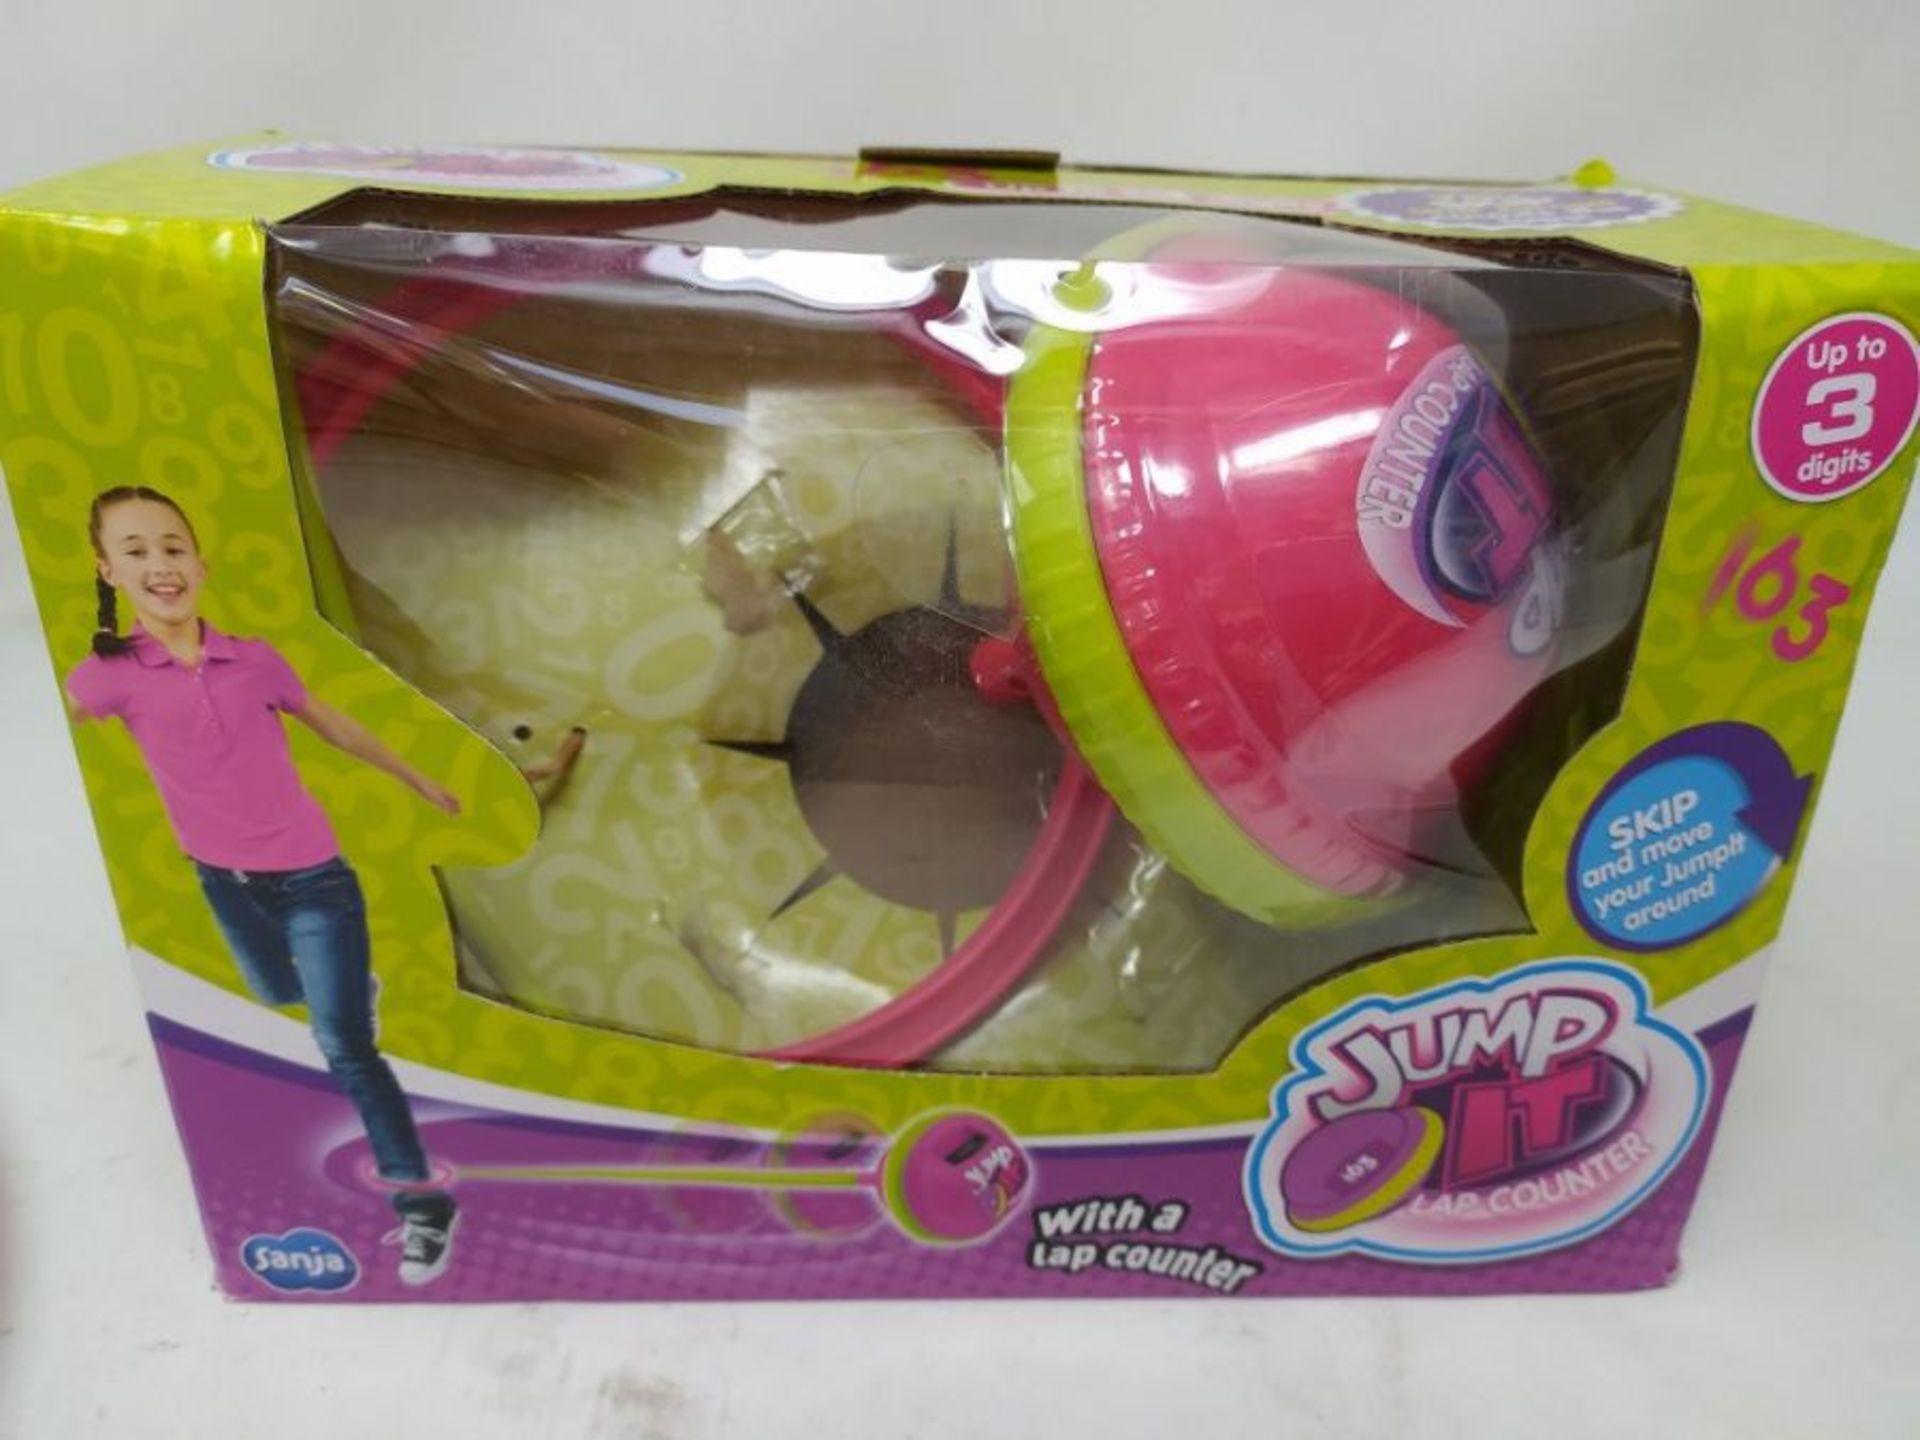 Jump it 07556 Pink-Skipping Fitness Coordination Toy with Counter Upto 1,000 laps for - Image 2 of 3